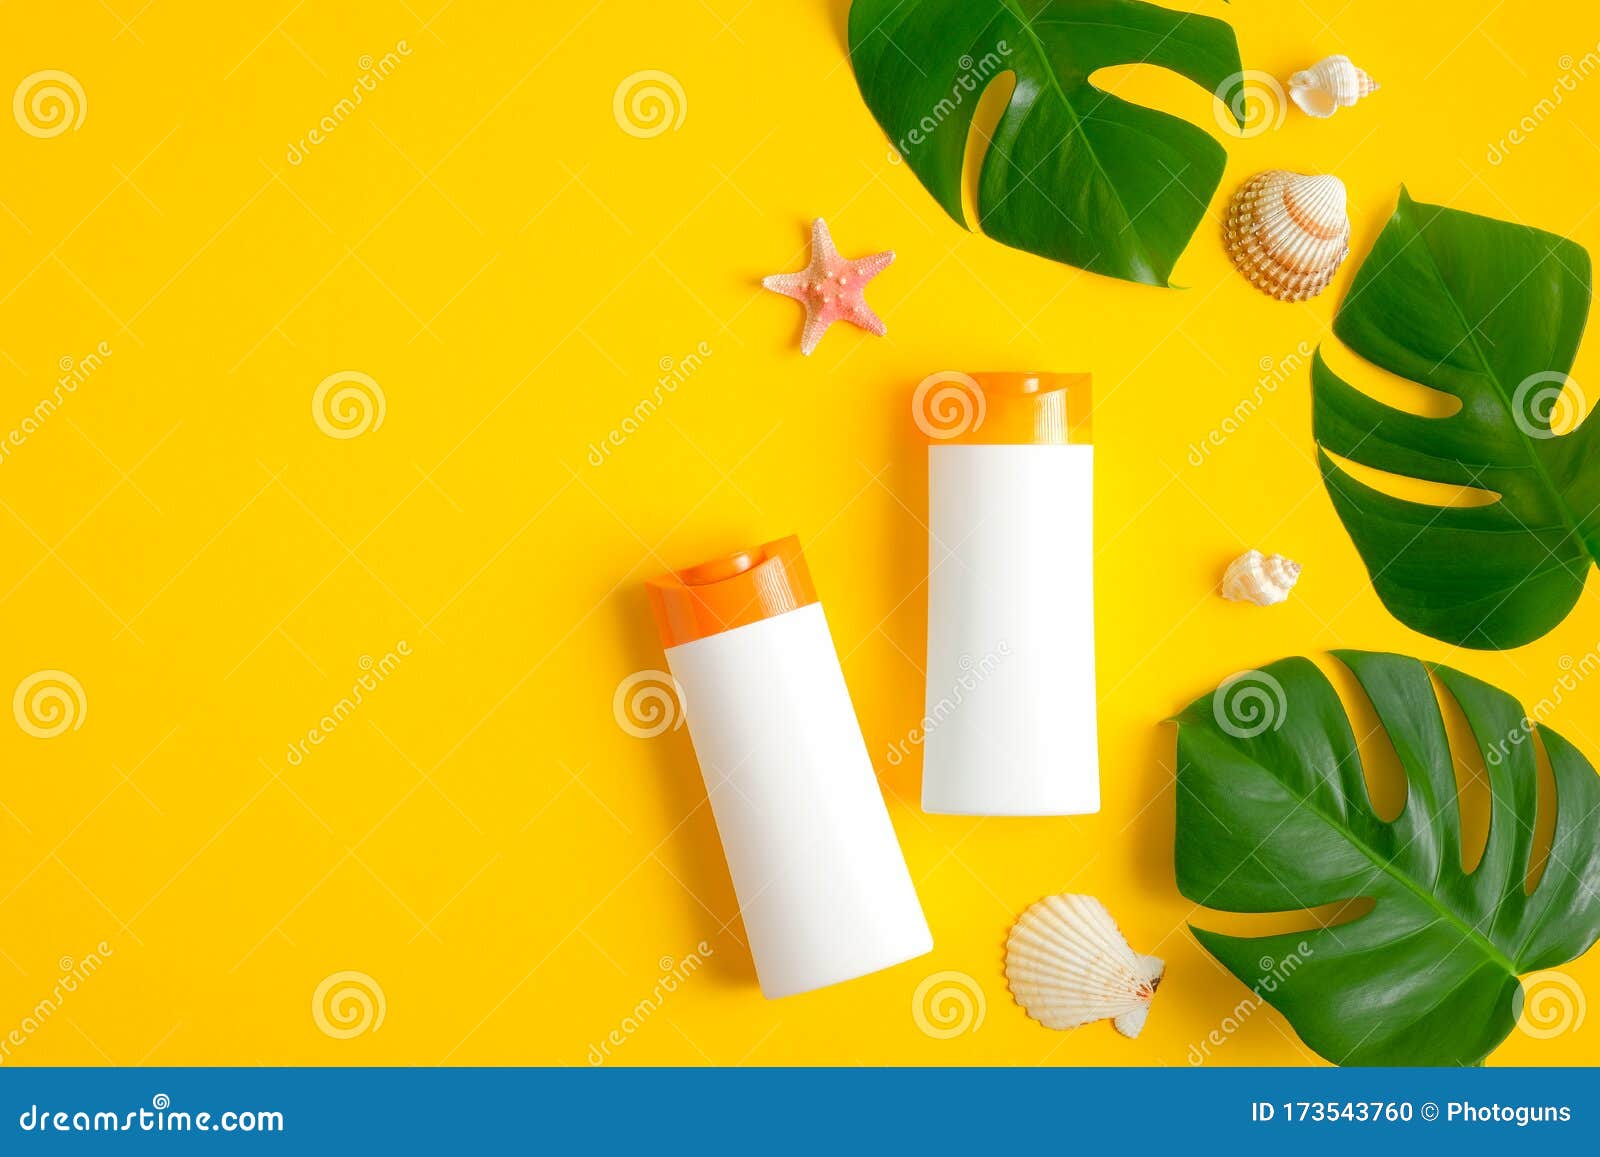 Blank Sunscreen Bottles Mockup without Labels, Tropical Leaves and ...